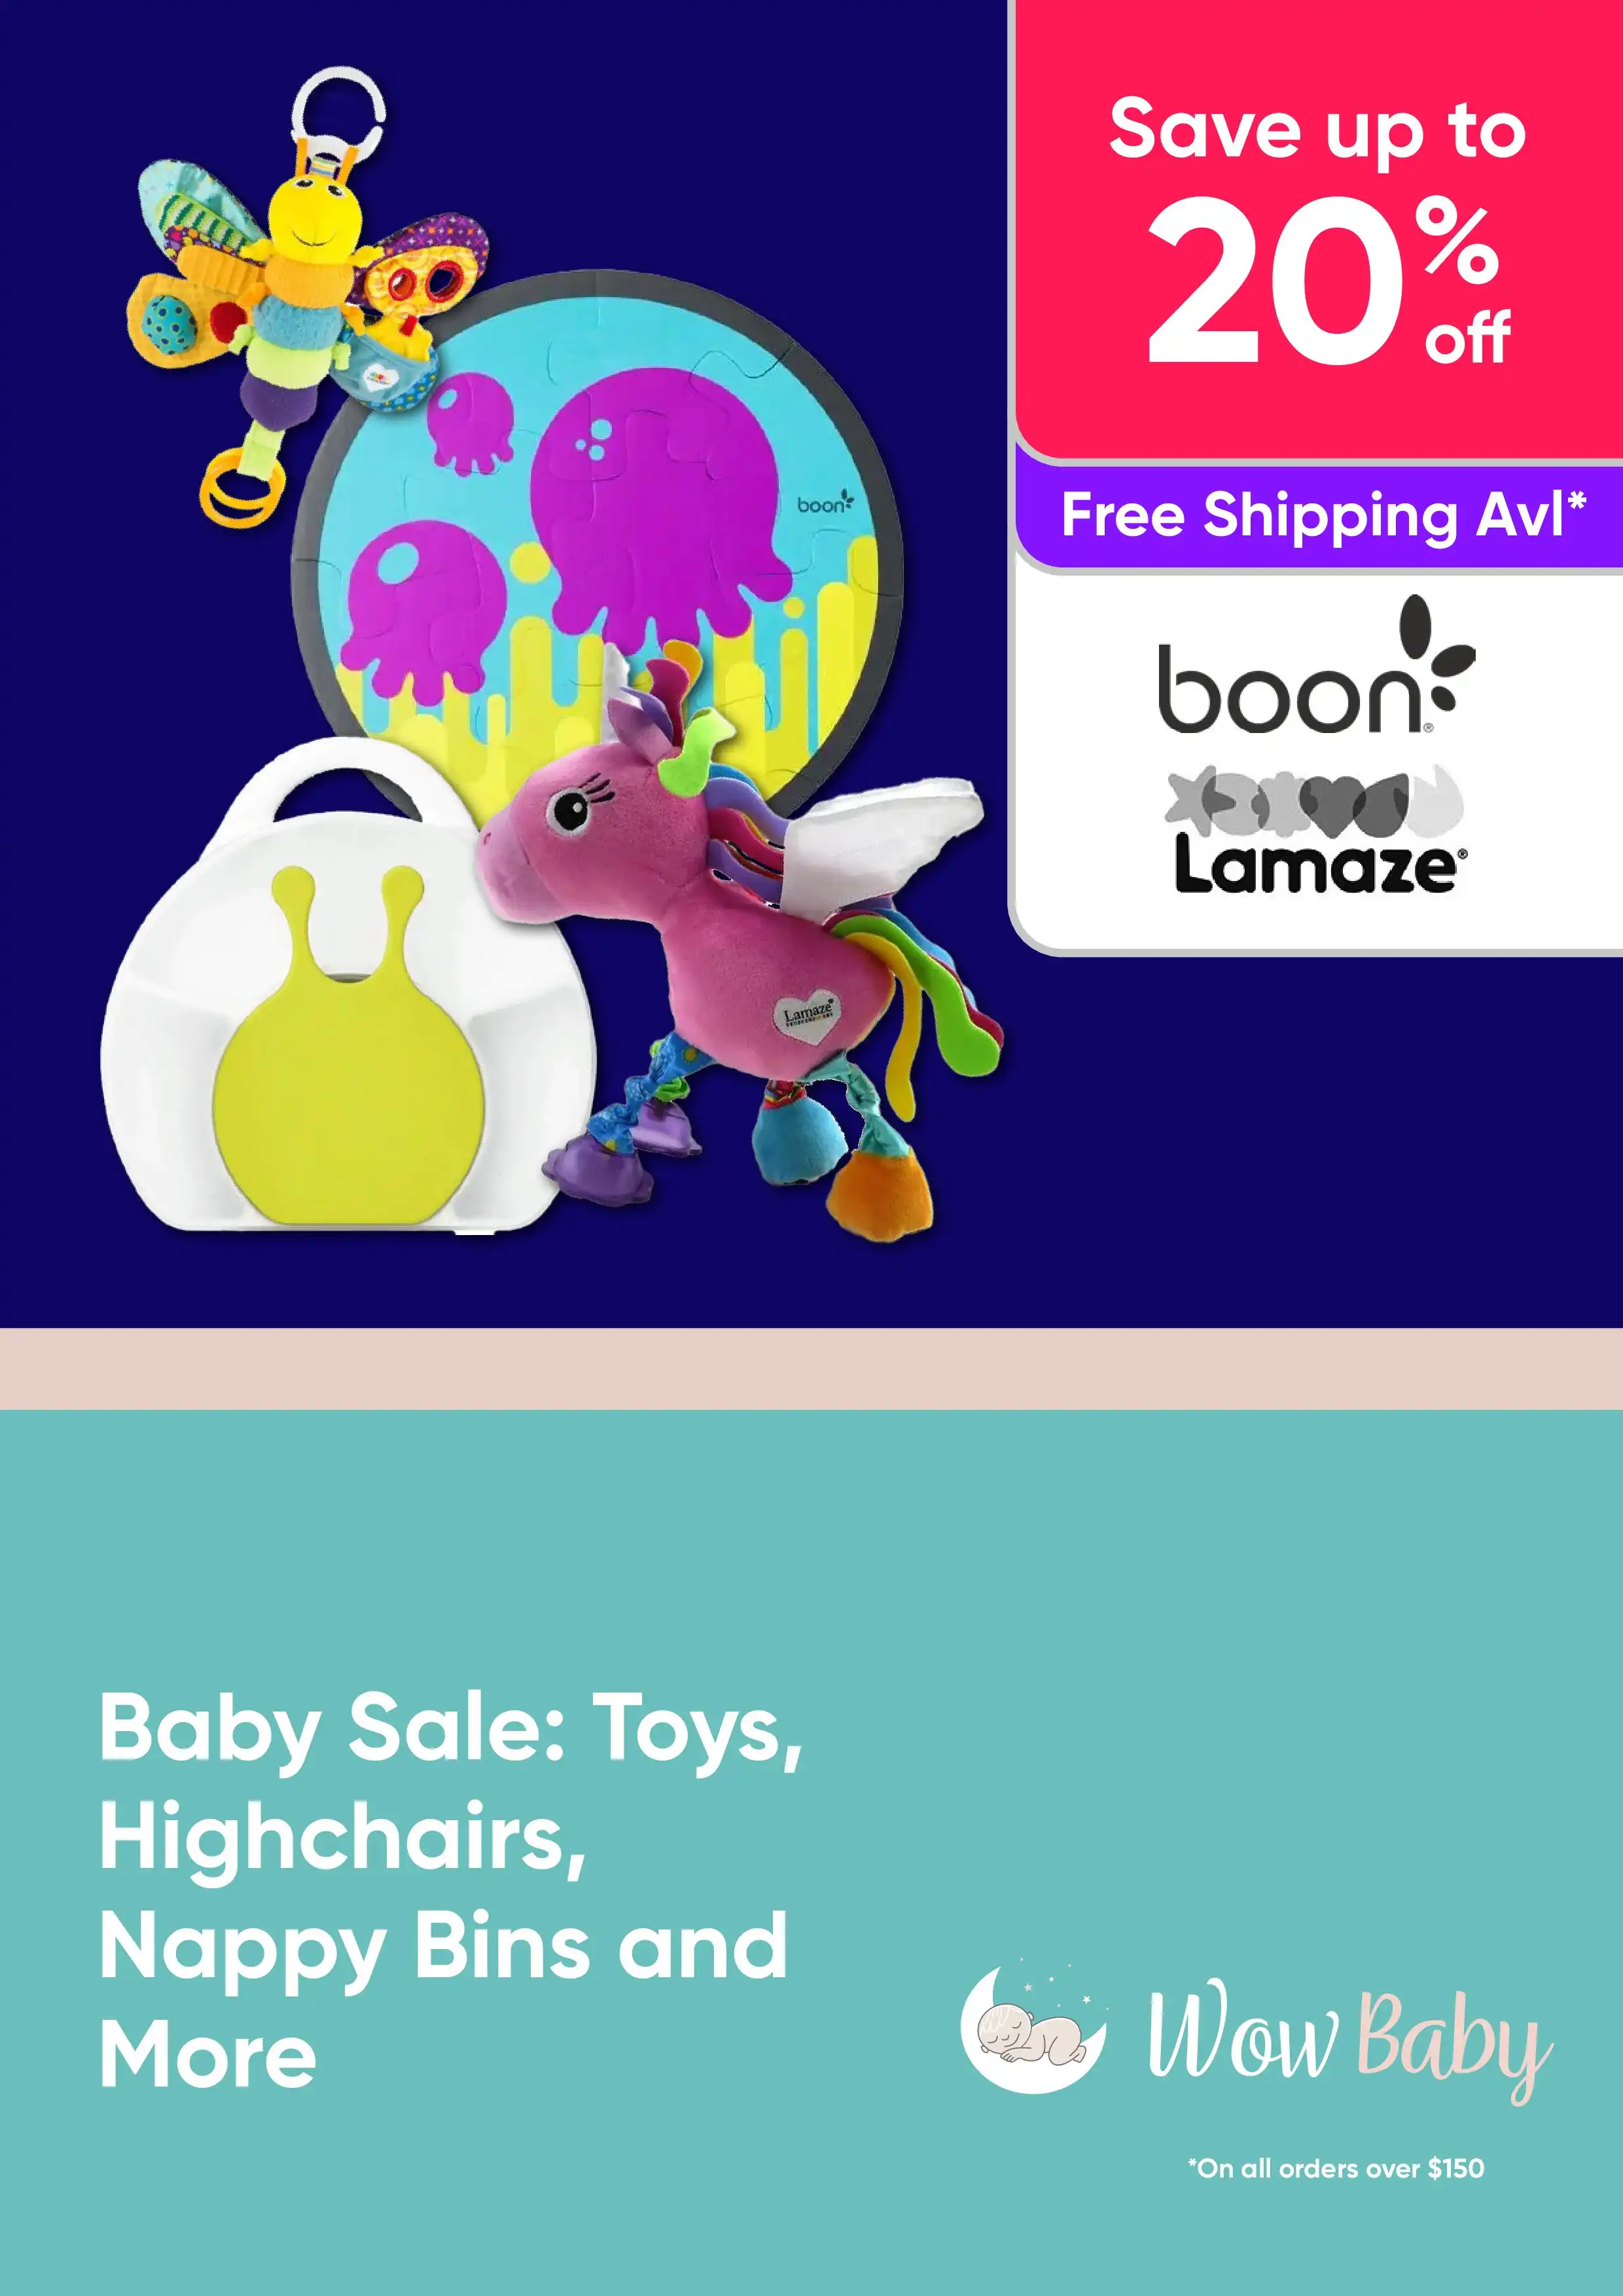 Wow Baby Deals and For Mum too - Shop Now!